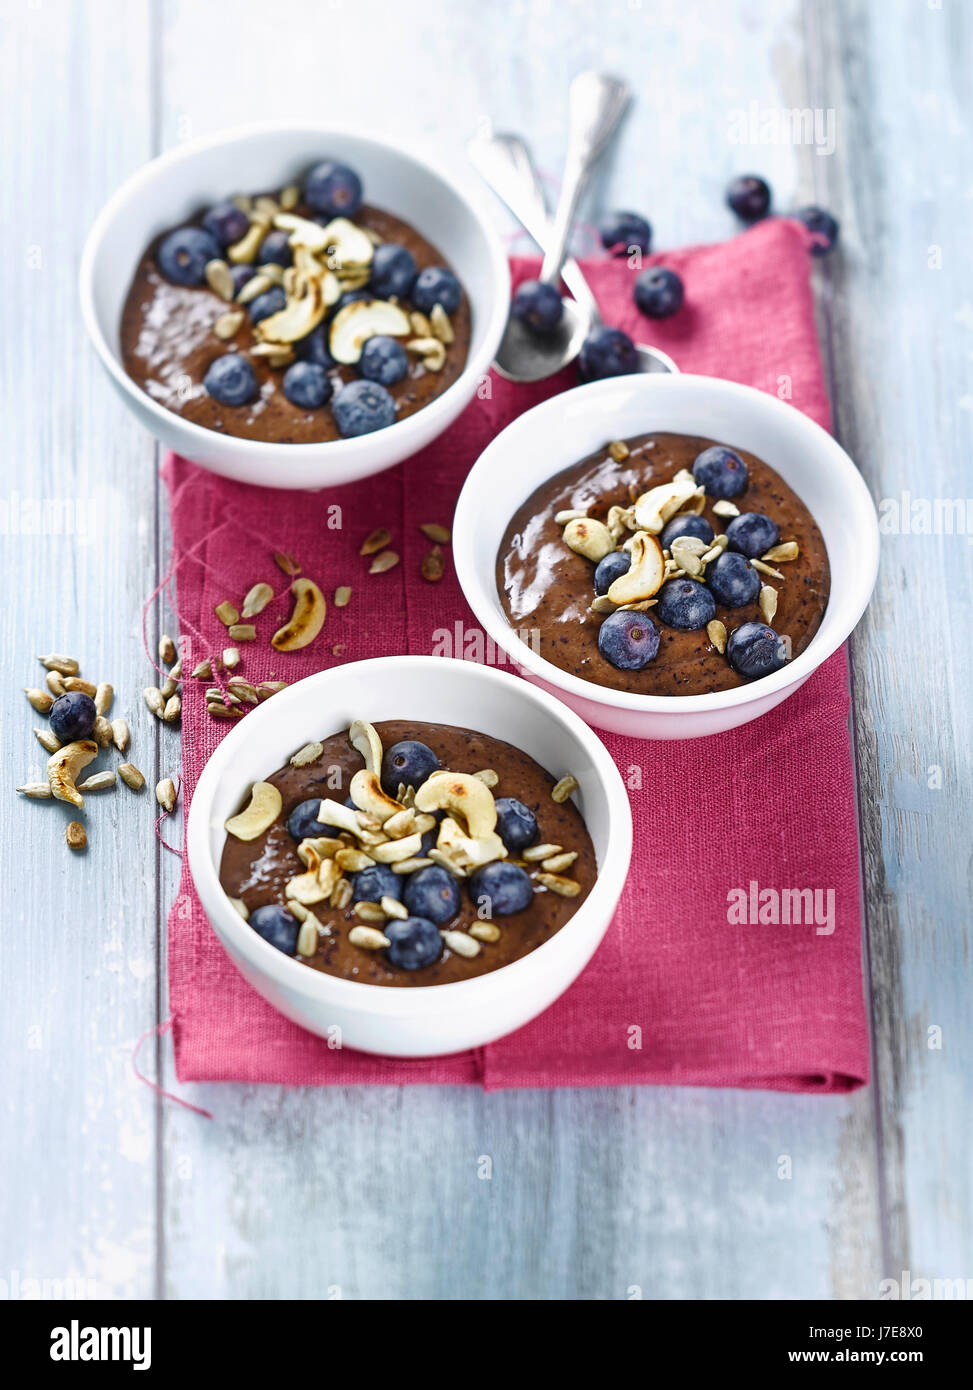 Blueberry smoothie bowl with plums Stock Photo